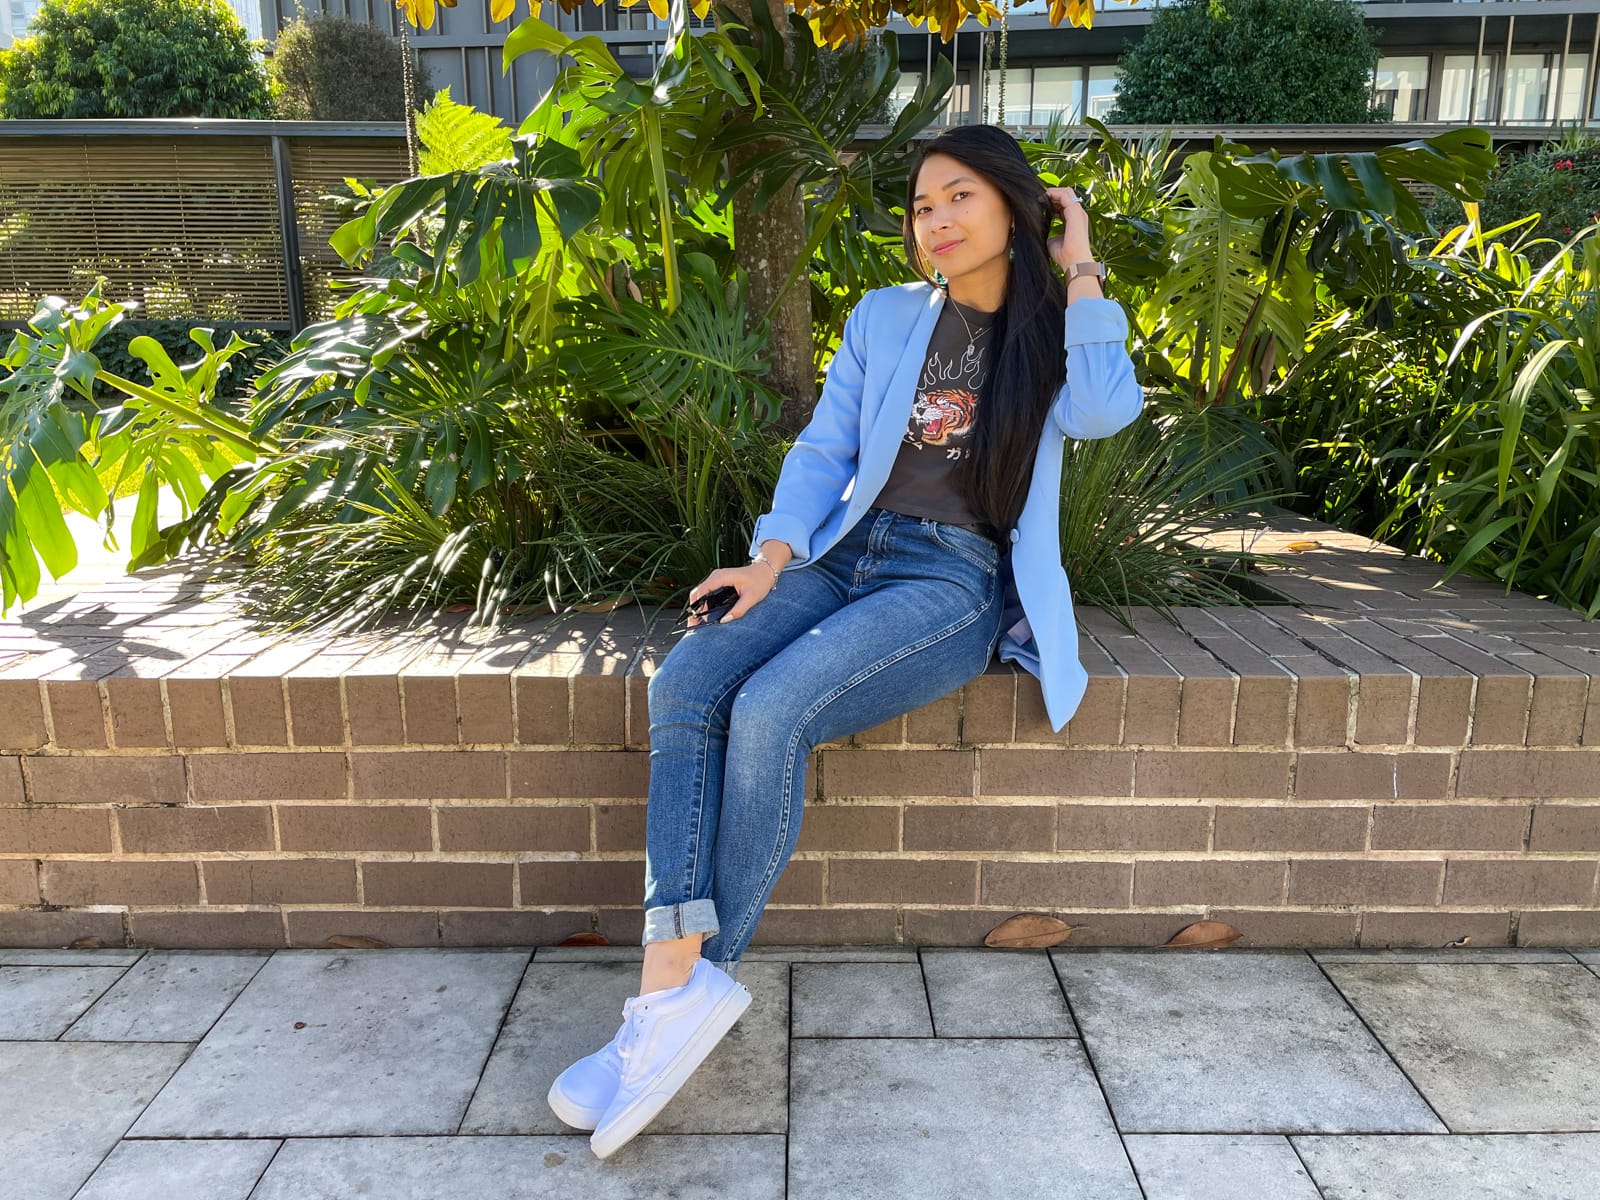 An Asian woman with dark hair, sitting on a brick wall with her knees bent and ankles crossed. She is wearing a blue blazer over a dark grey graphic tee and blue jeans. She is wearing white sneakers.